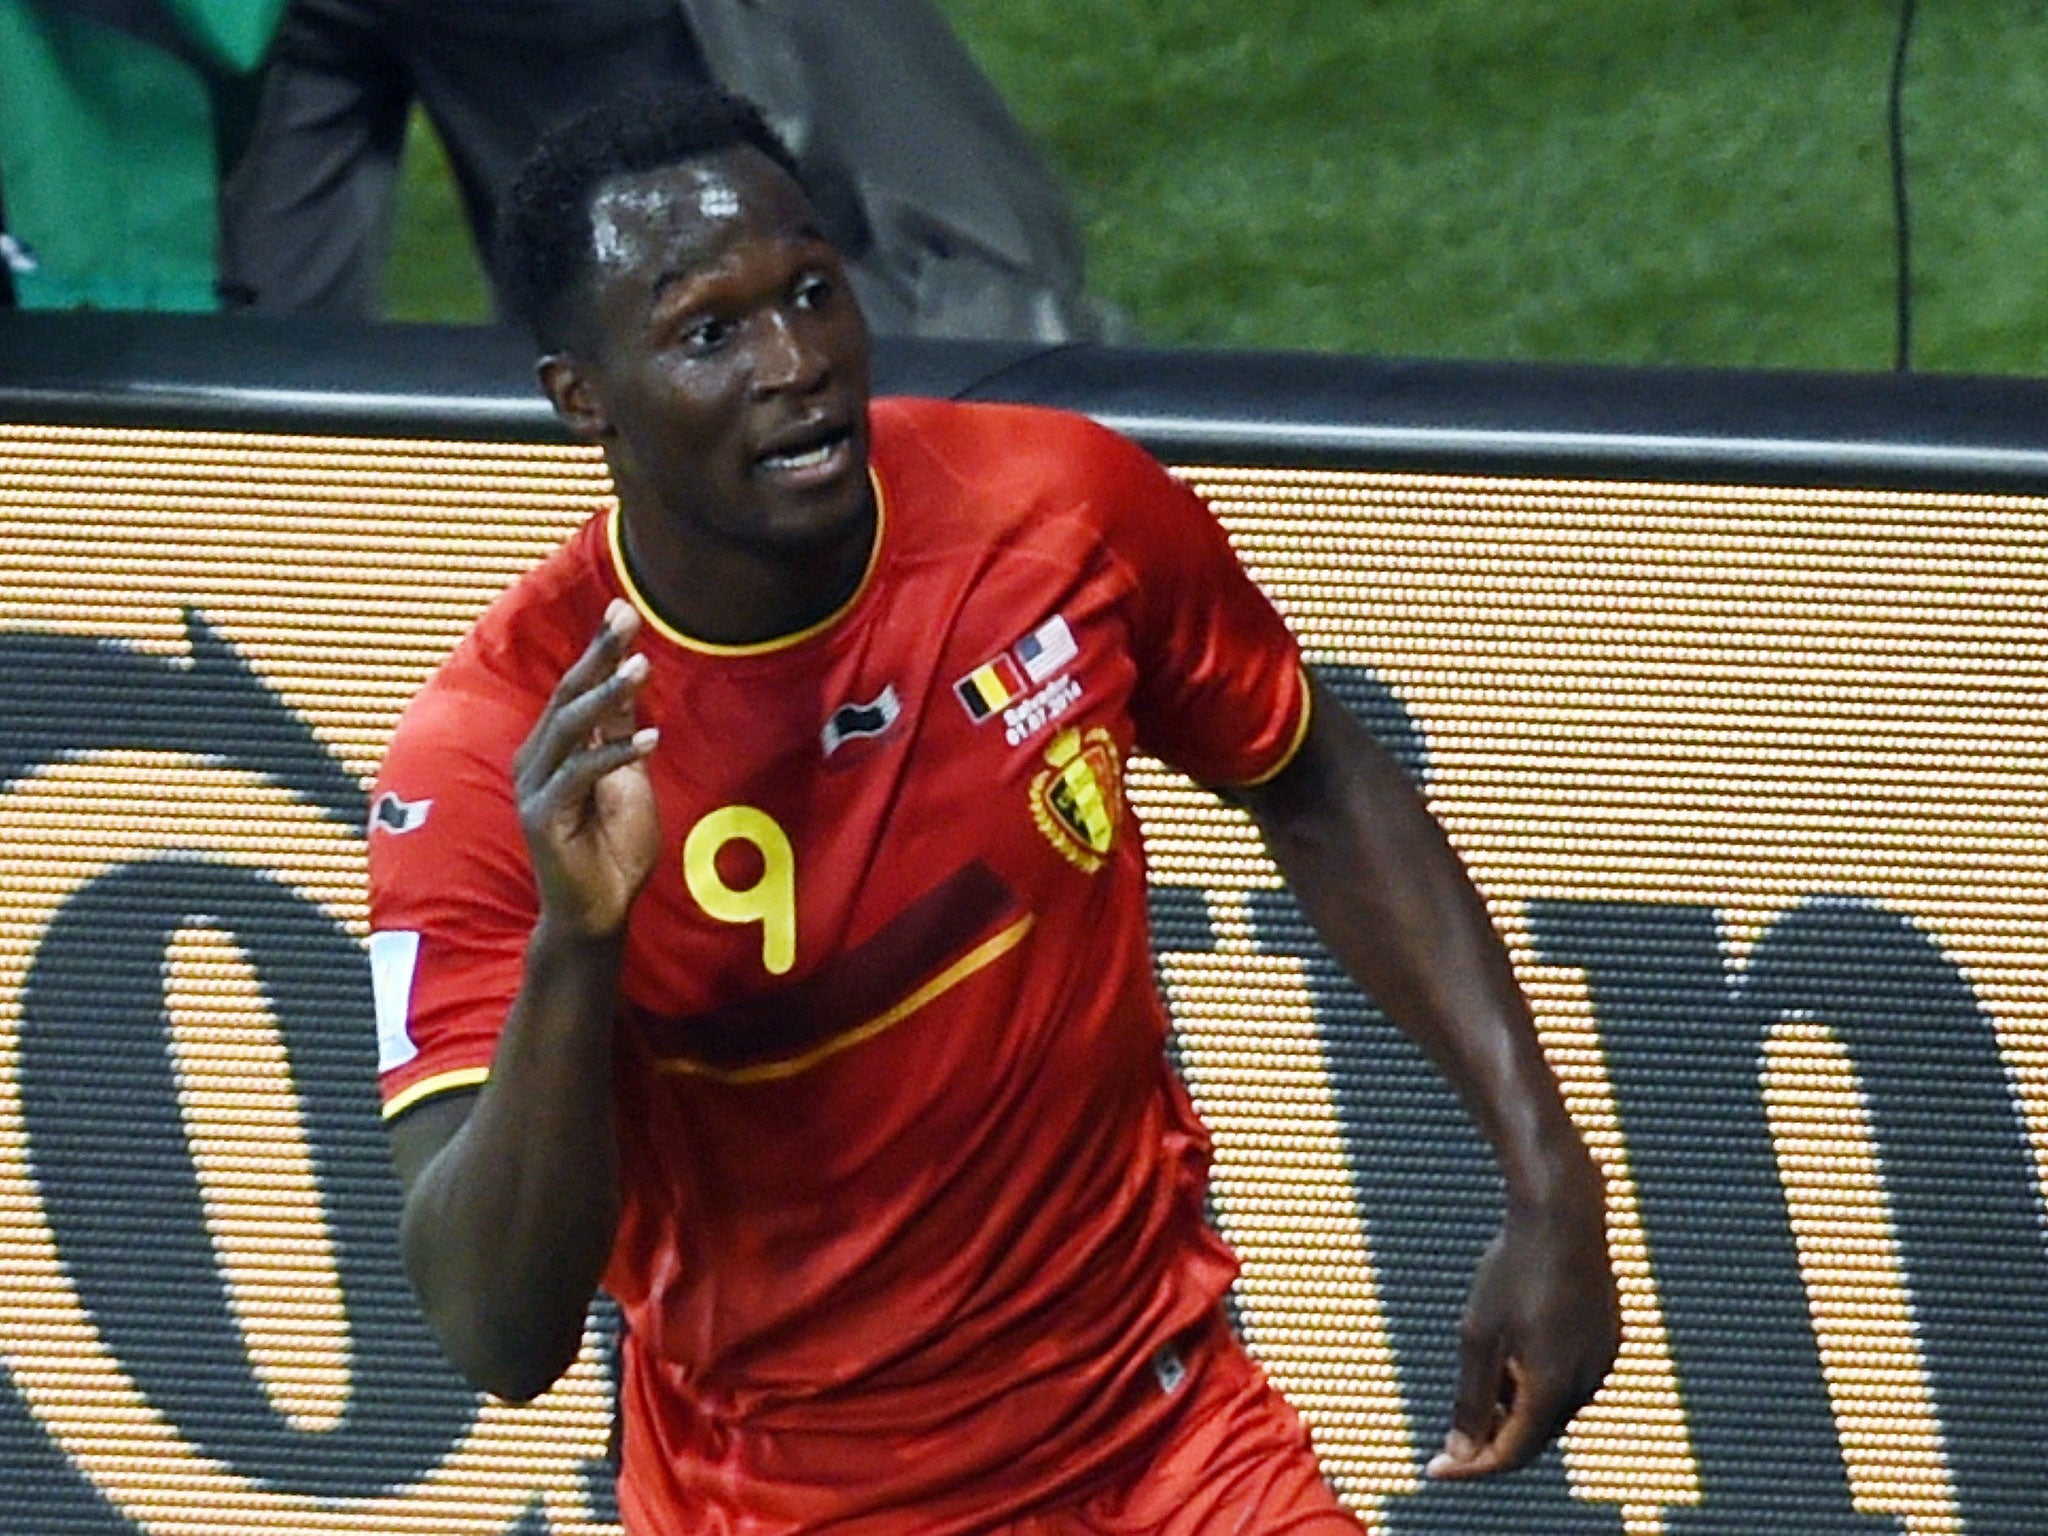 Romelu Lukaku is moving to Real Madrid on loan, according to reports in Spain